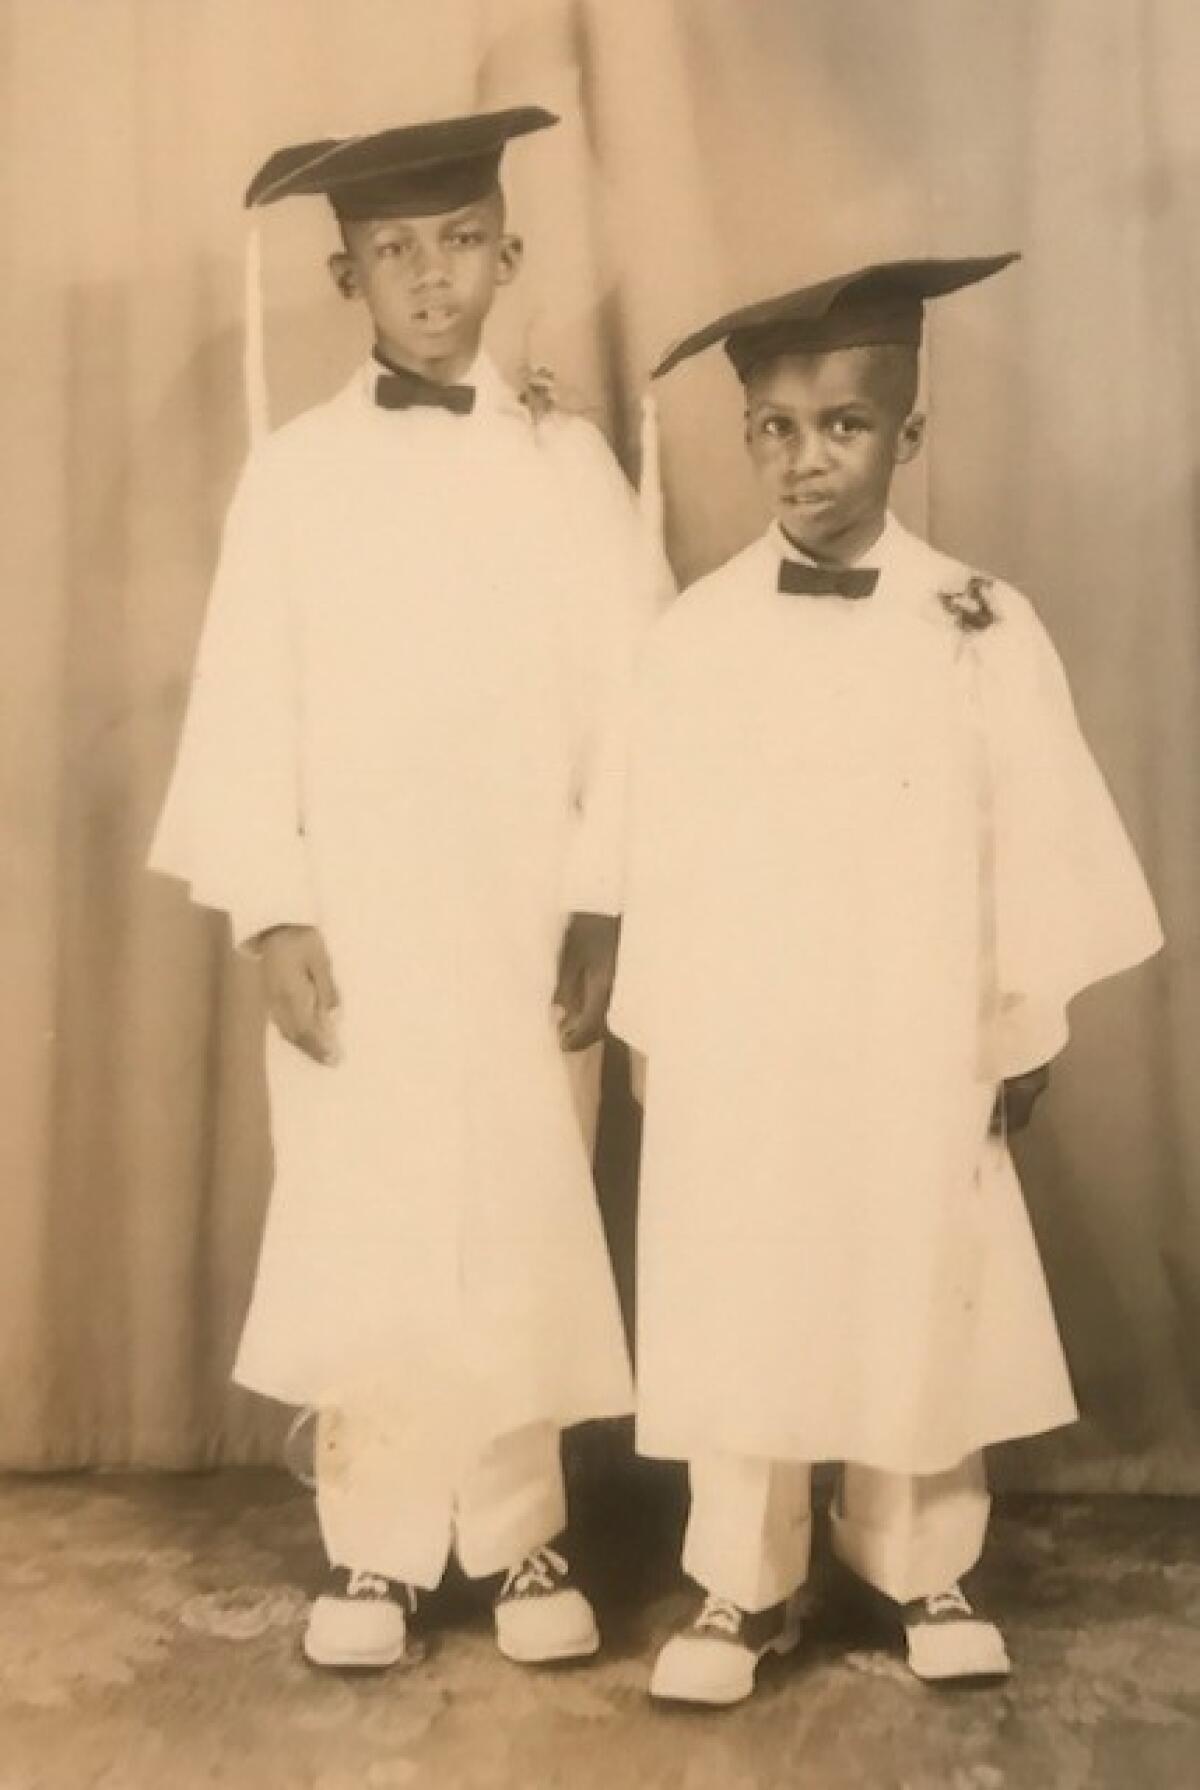 Big Willie and his younger brother Don Ray Robinson wear caps and gowns for a school graduation photo.